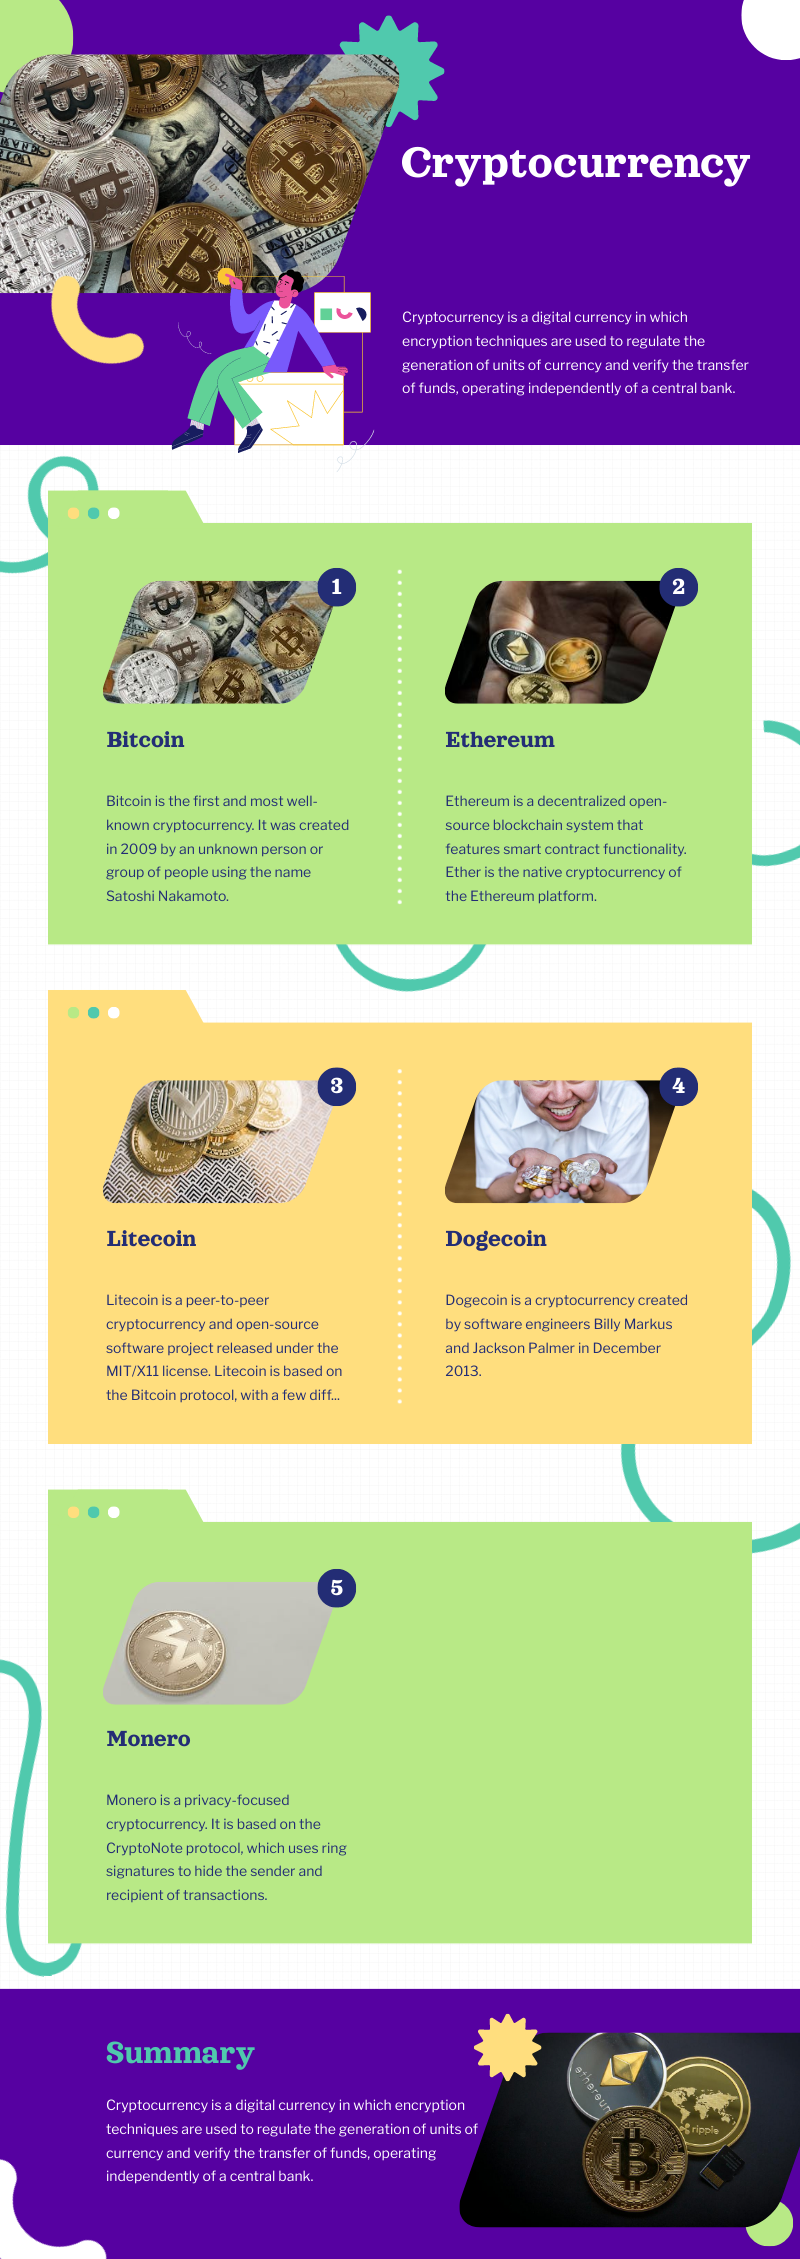 An infographic titled "Cryptocurrency" with sections on Bitcoin, Ethereum, Litecoin, Dogecoin, and Monero, detailing their individual characteristics and origins, accompanied by representative images for each. 